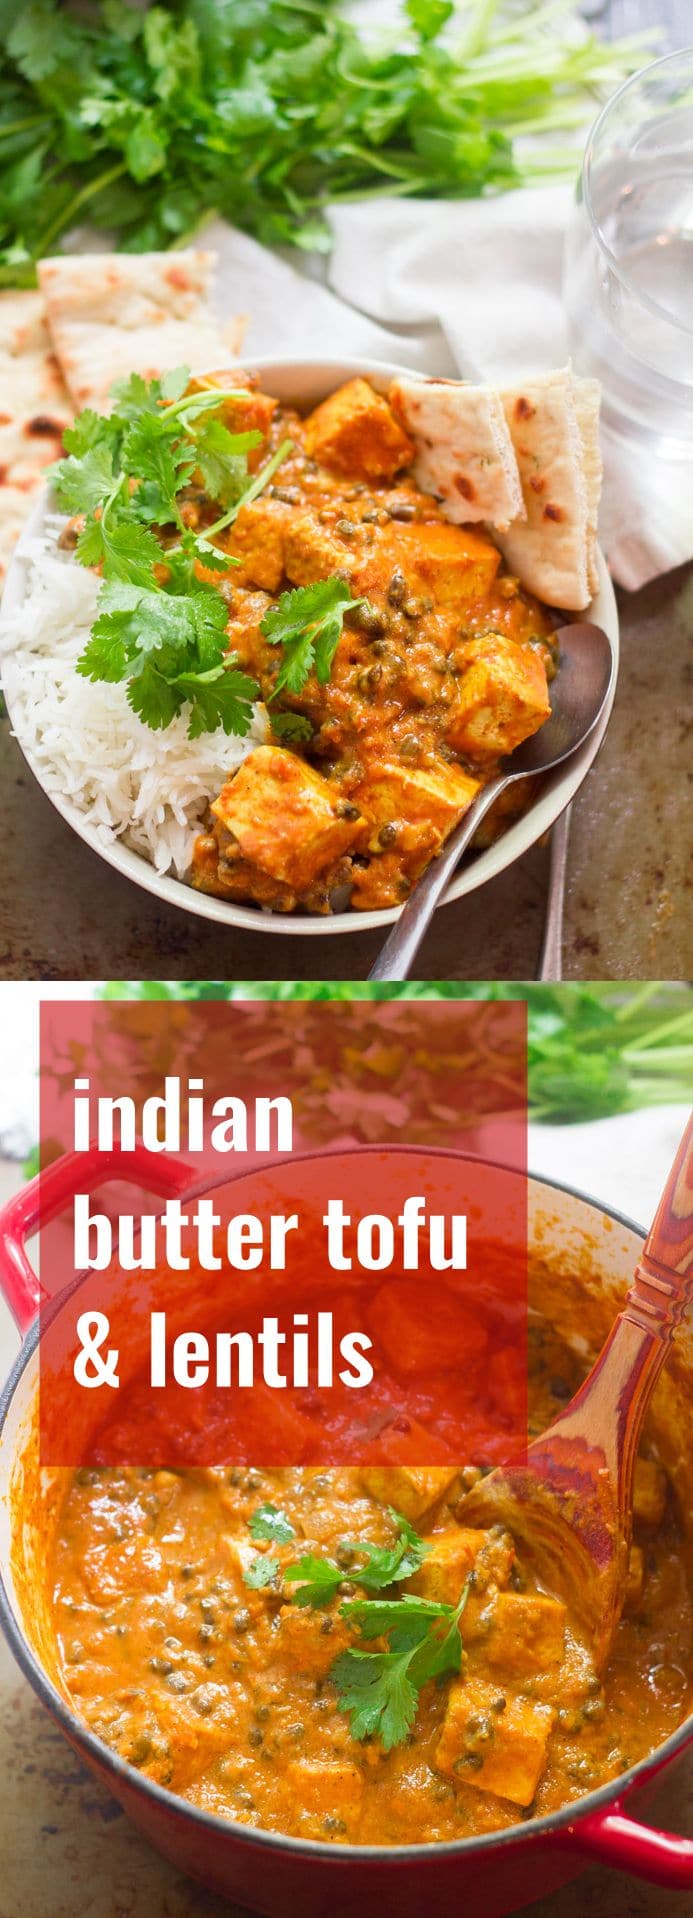 Indian Butter Tofu and Lentils